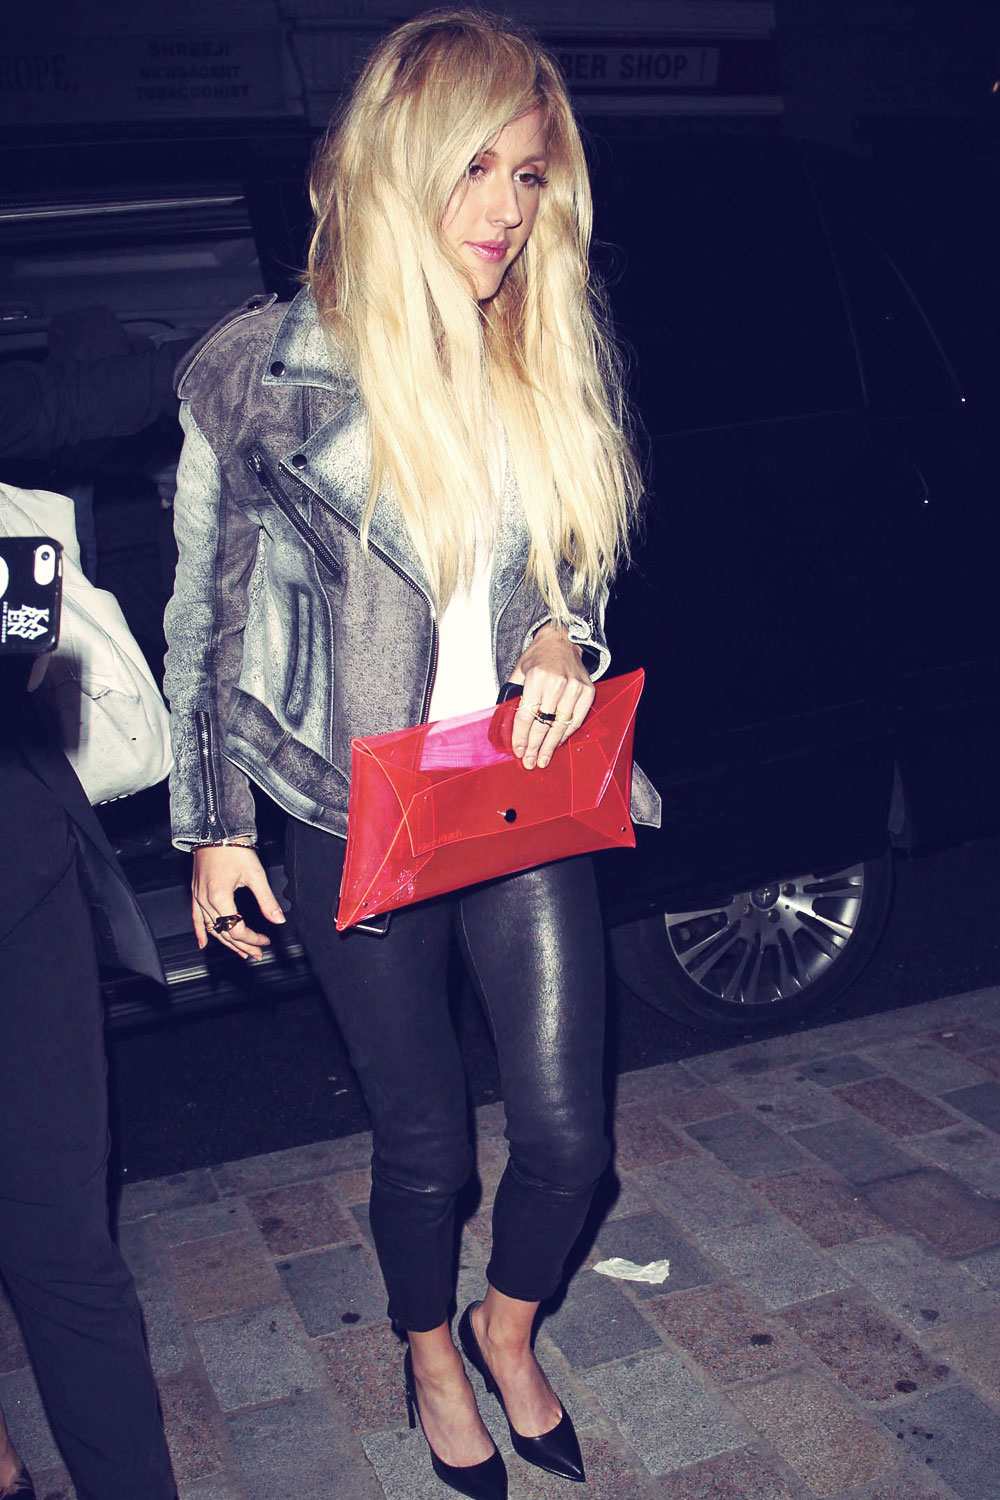 Ellie Goulding arriving at the Chiltern Firehouse hotel